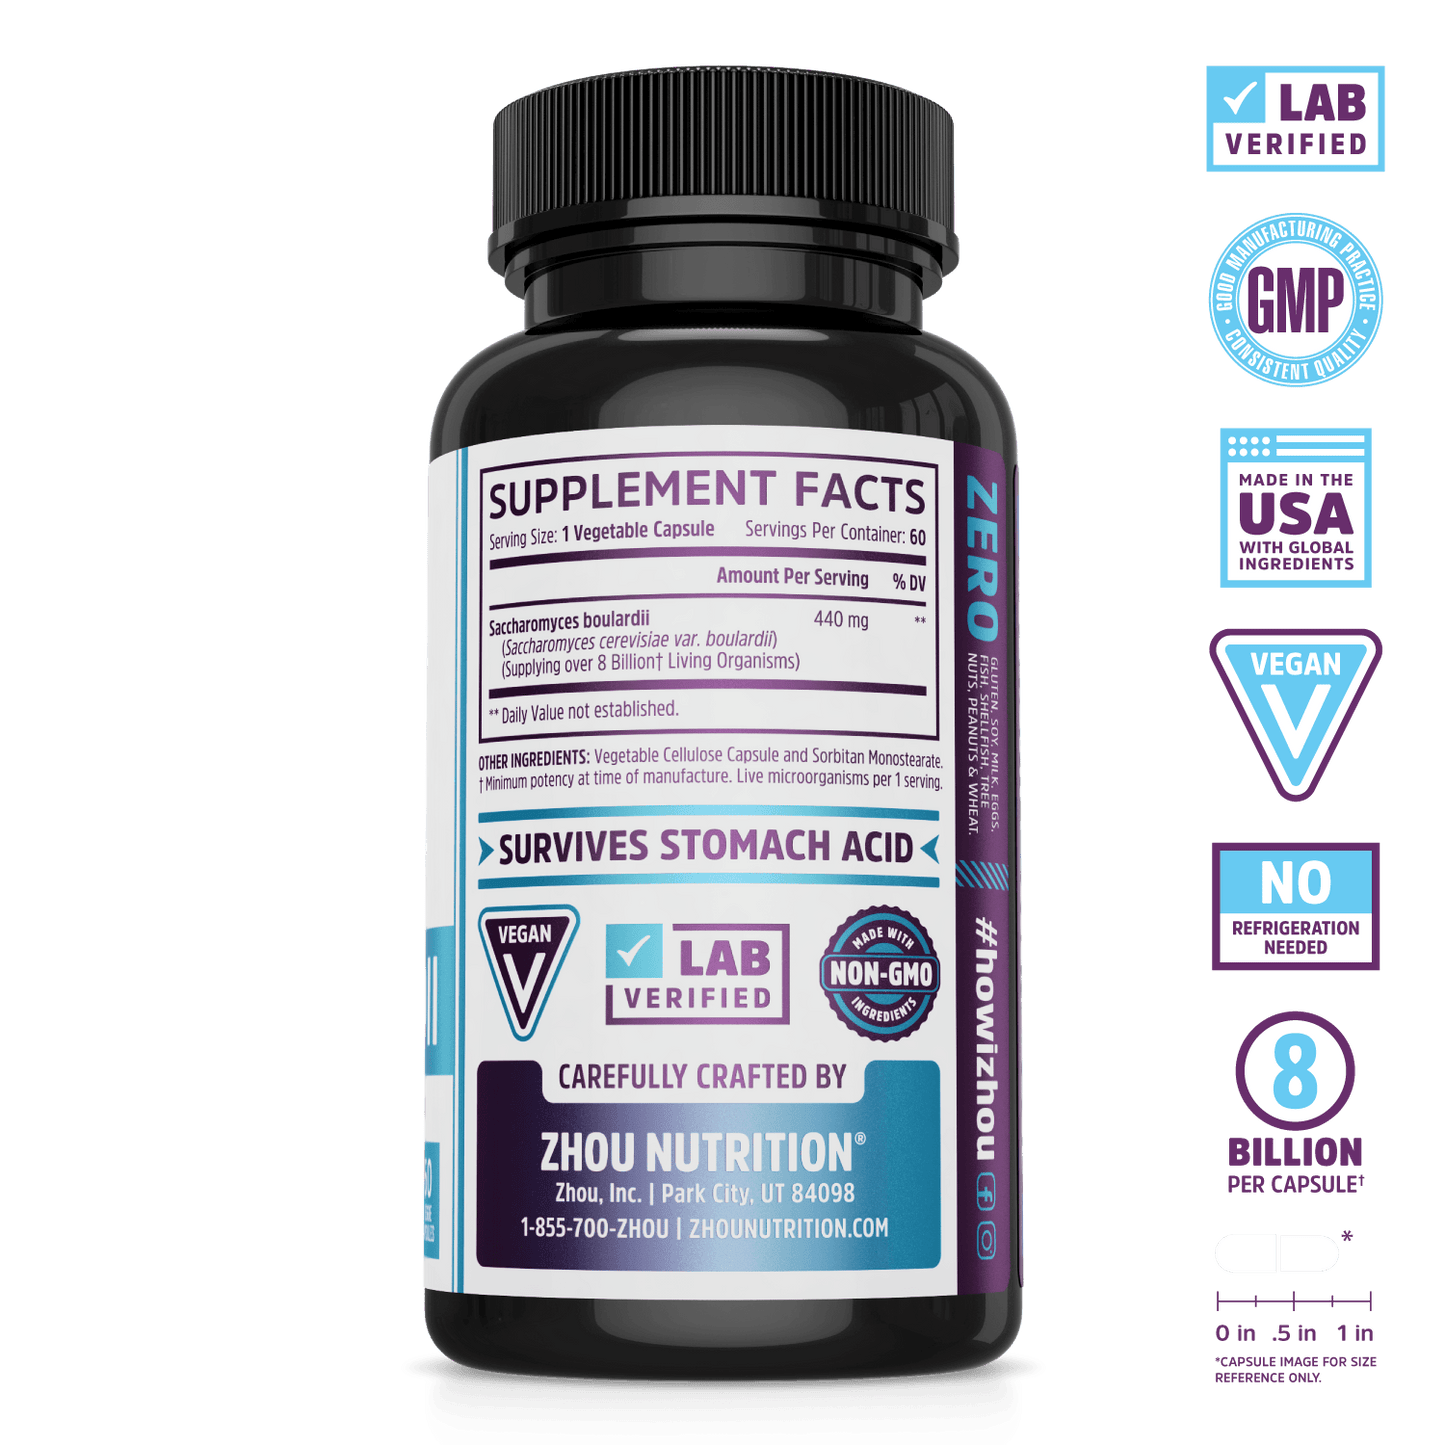 S. Boulardii Probiotic for Gut Health. Lab verified, good manufacturing practices, made in the USA with global ingredients, vegan, no refrigeration needed, 8 billion per capsule